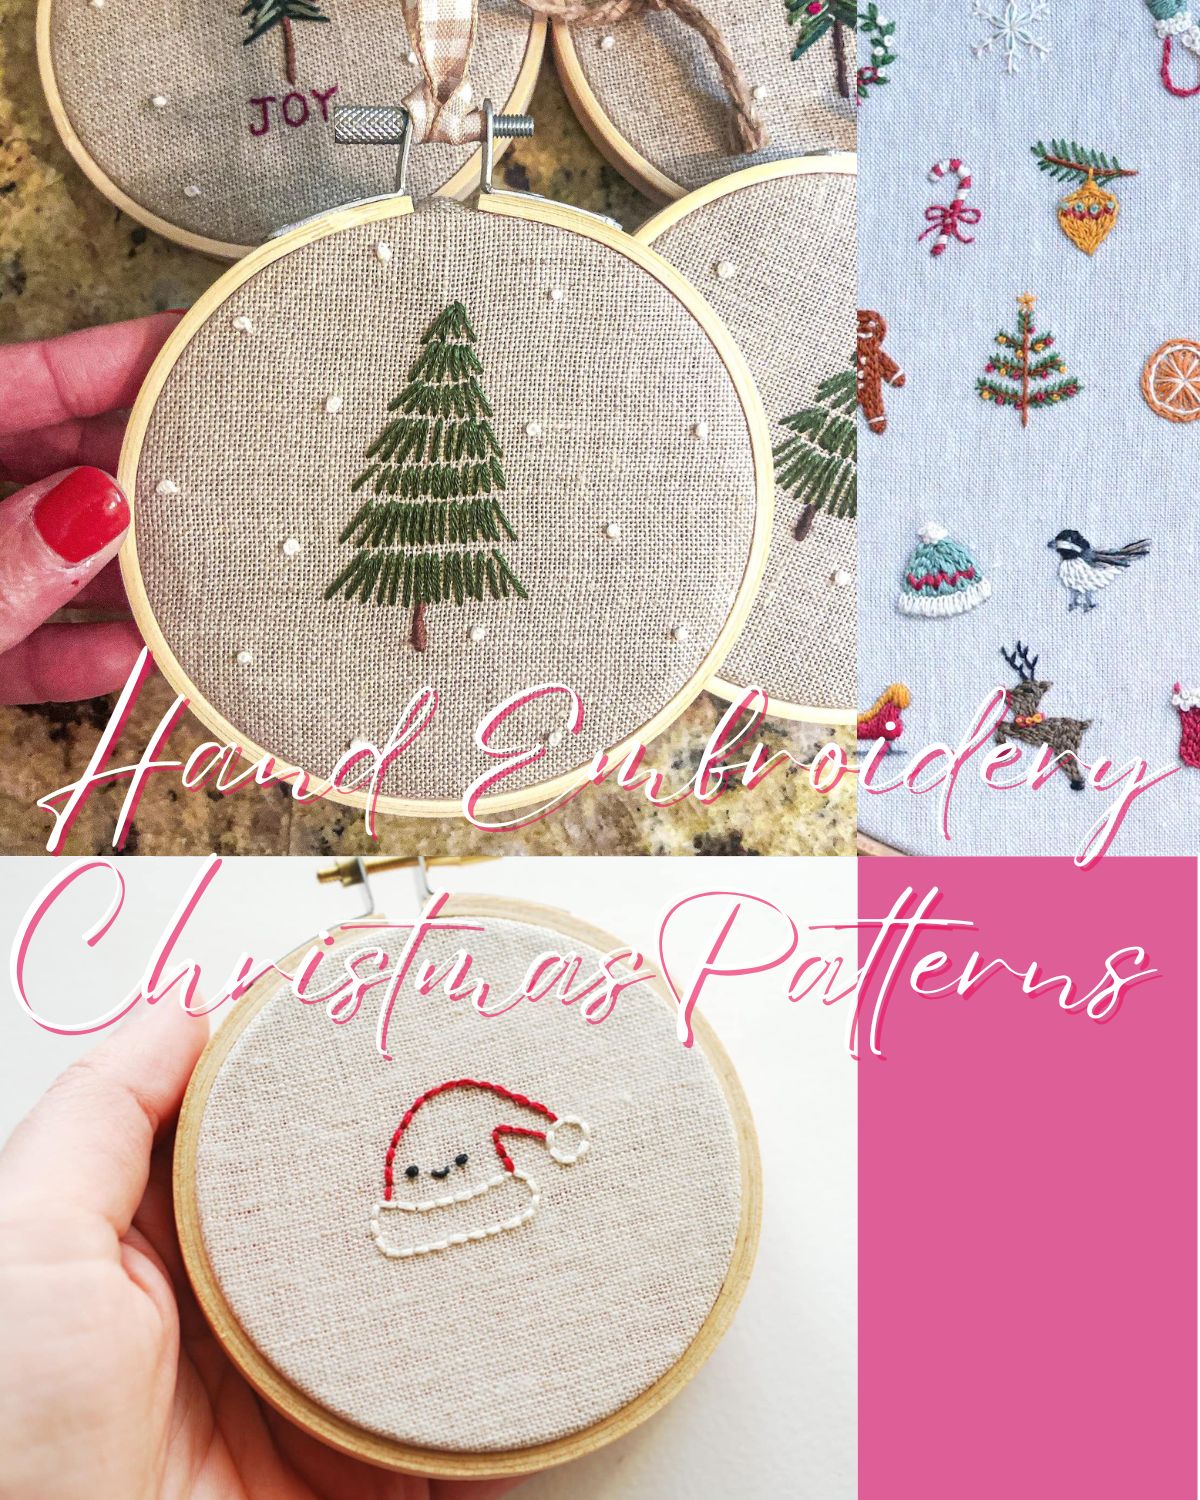 Cute and simple embroidery patterns for hand stitching 